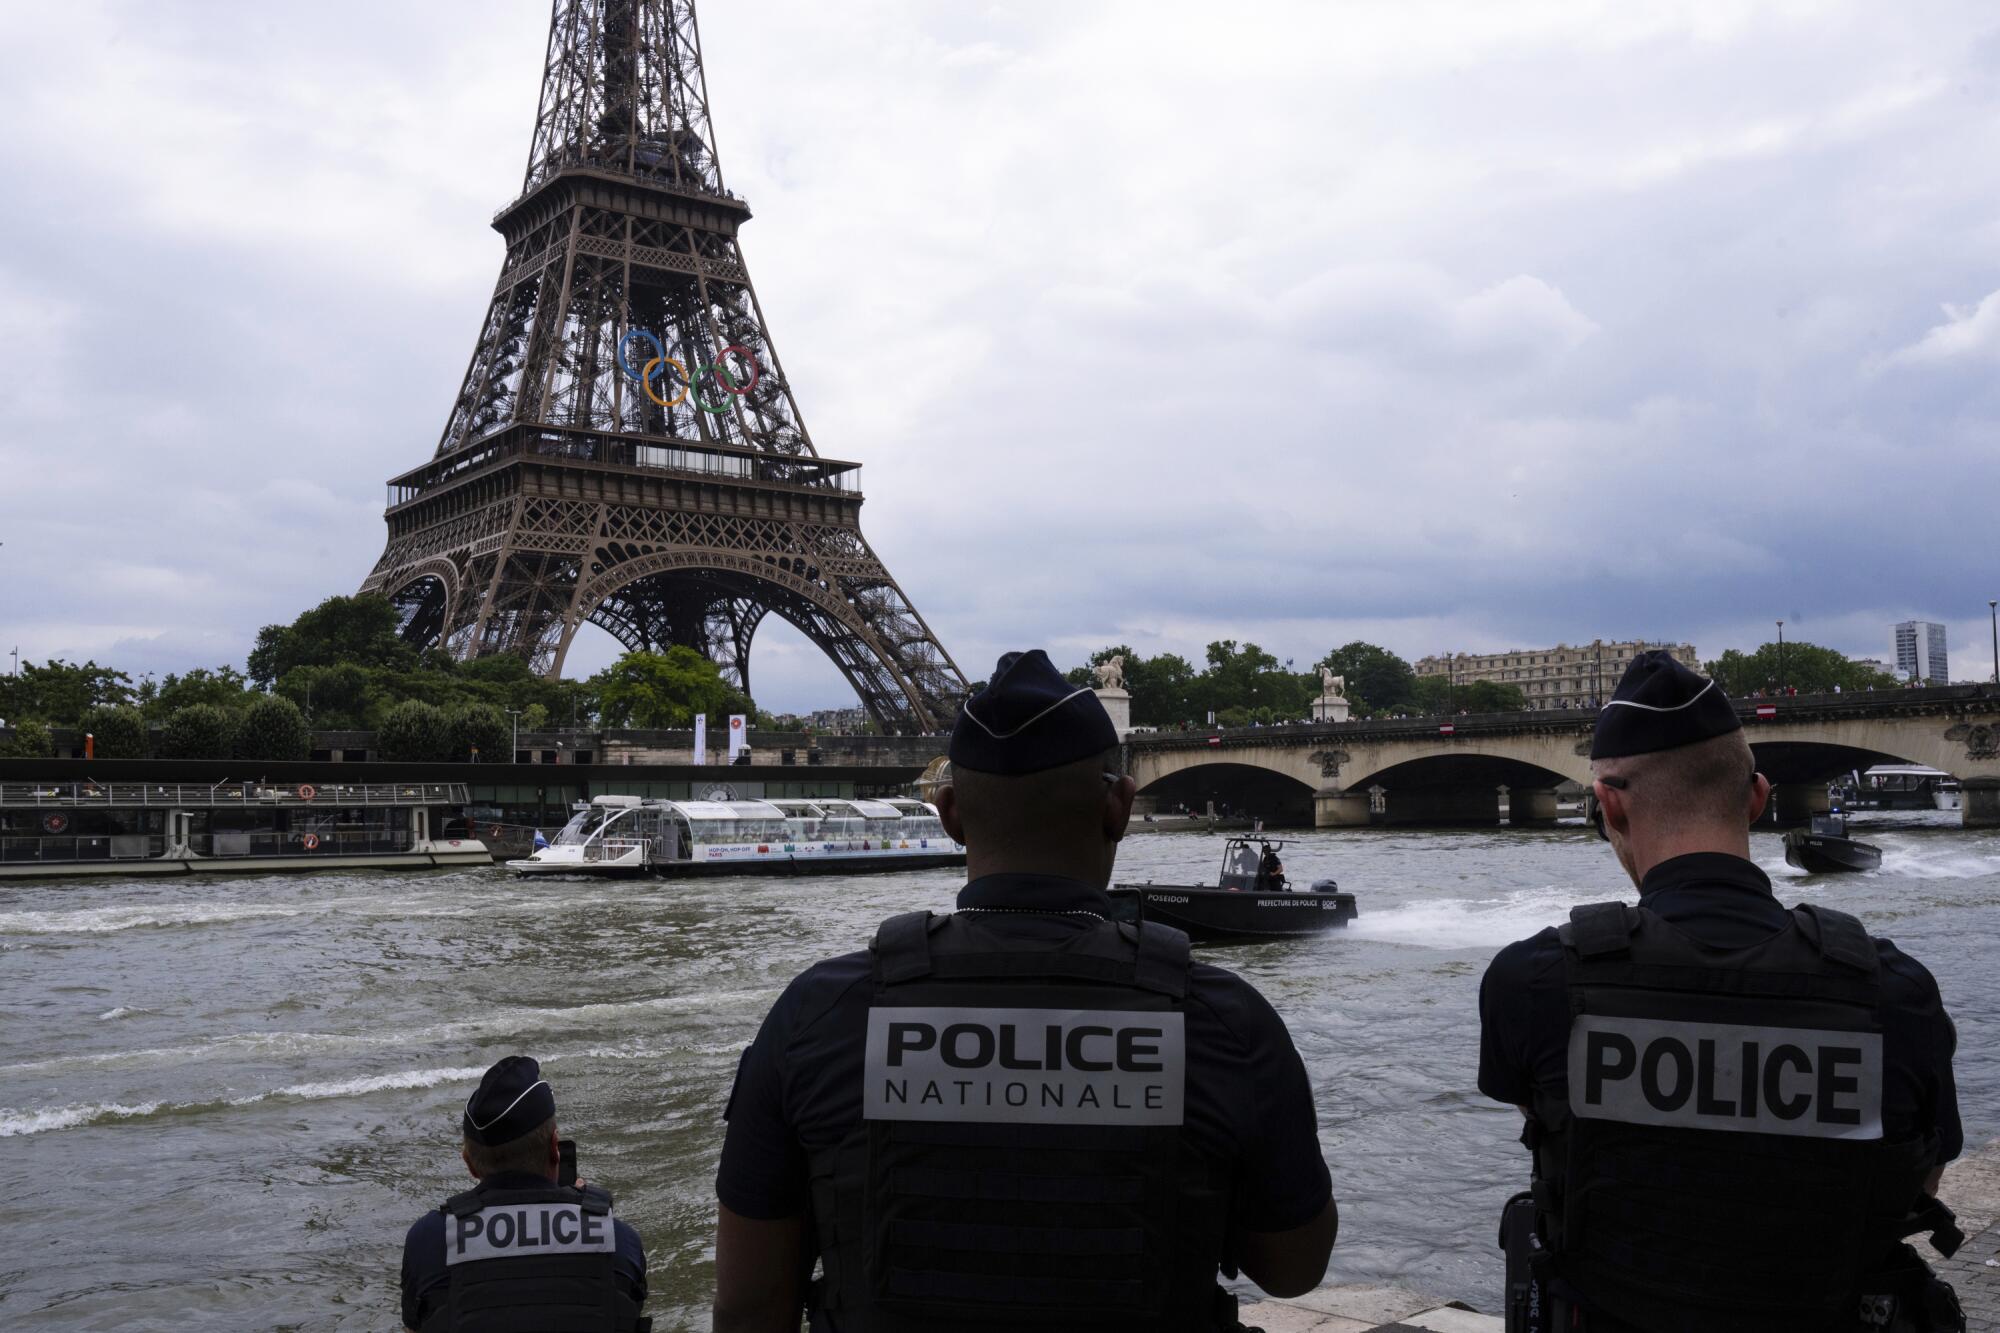 Police officers watch river police boats patroling past the Eiffel Tower on the Seine River in Paris on July 2.